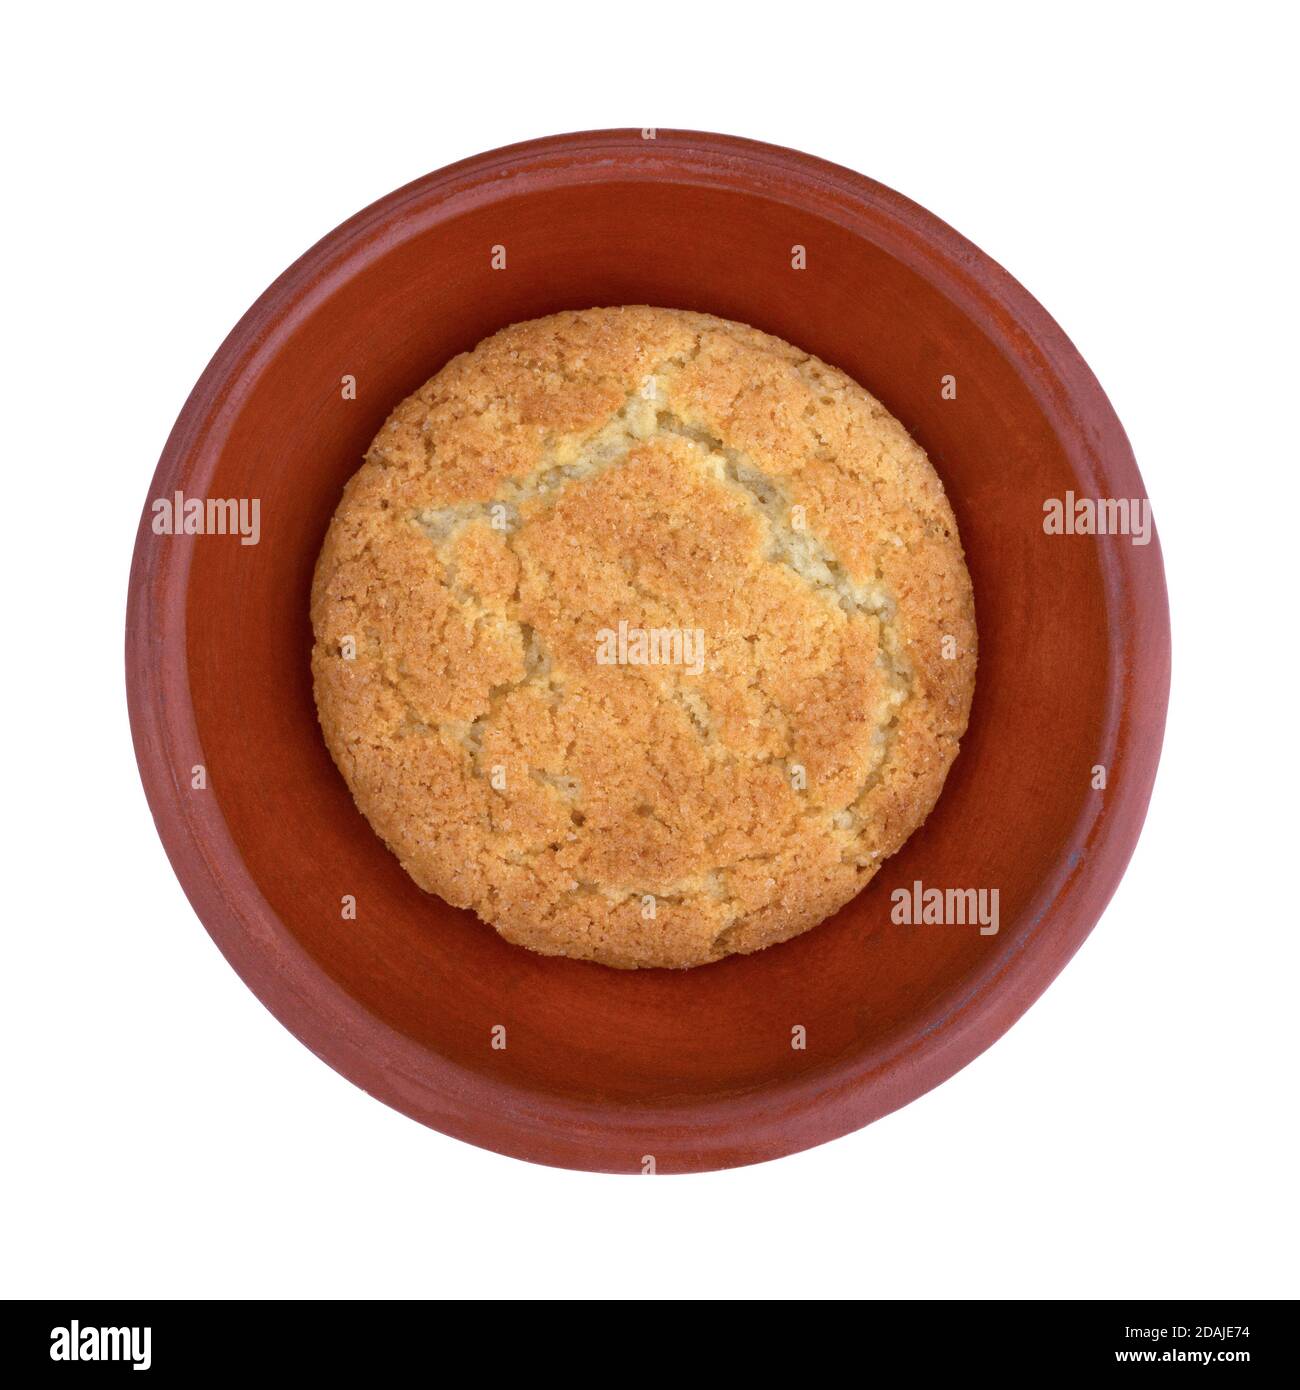 Single coconut flavor cookie on a small dish isolated on a white background. Stock Photo